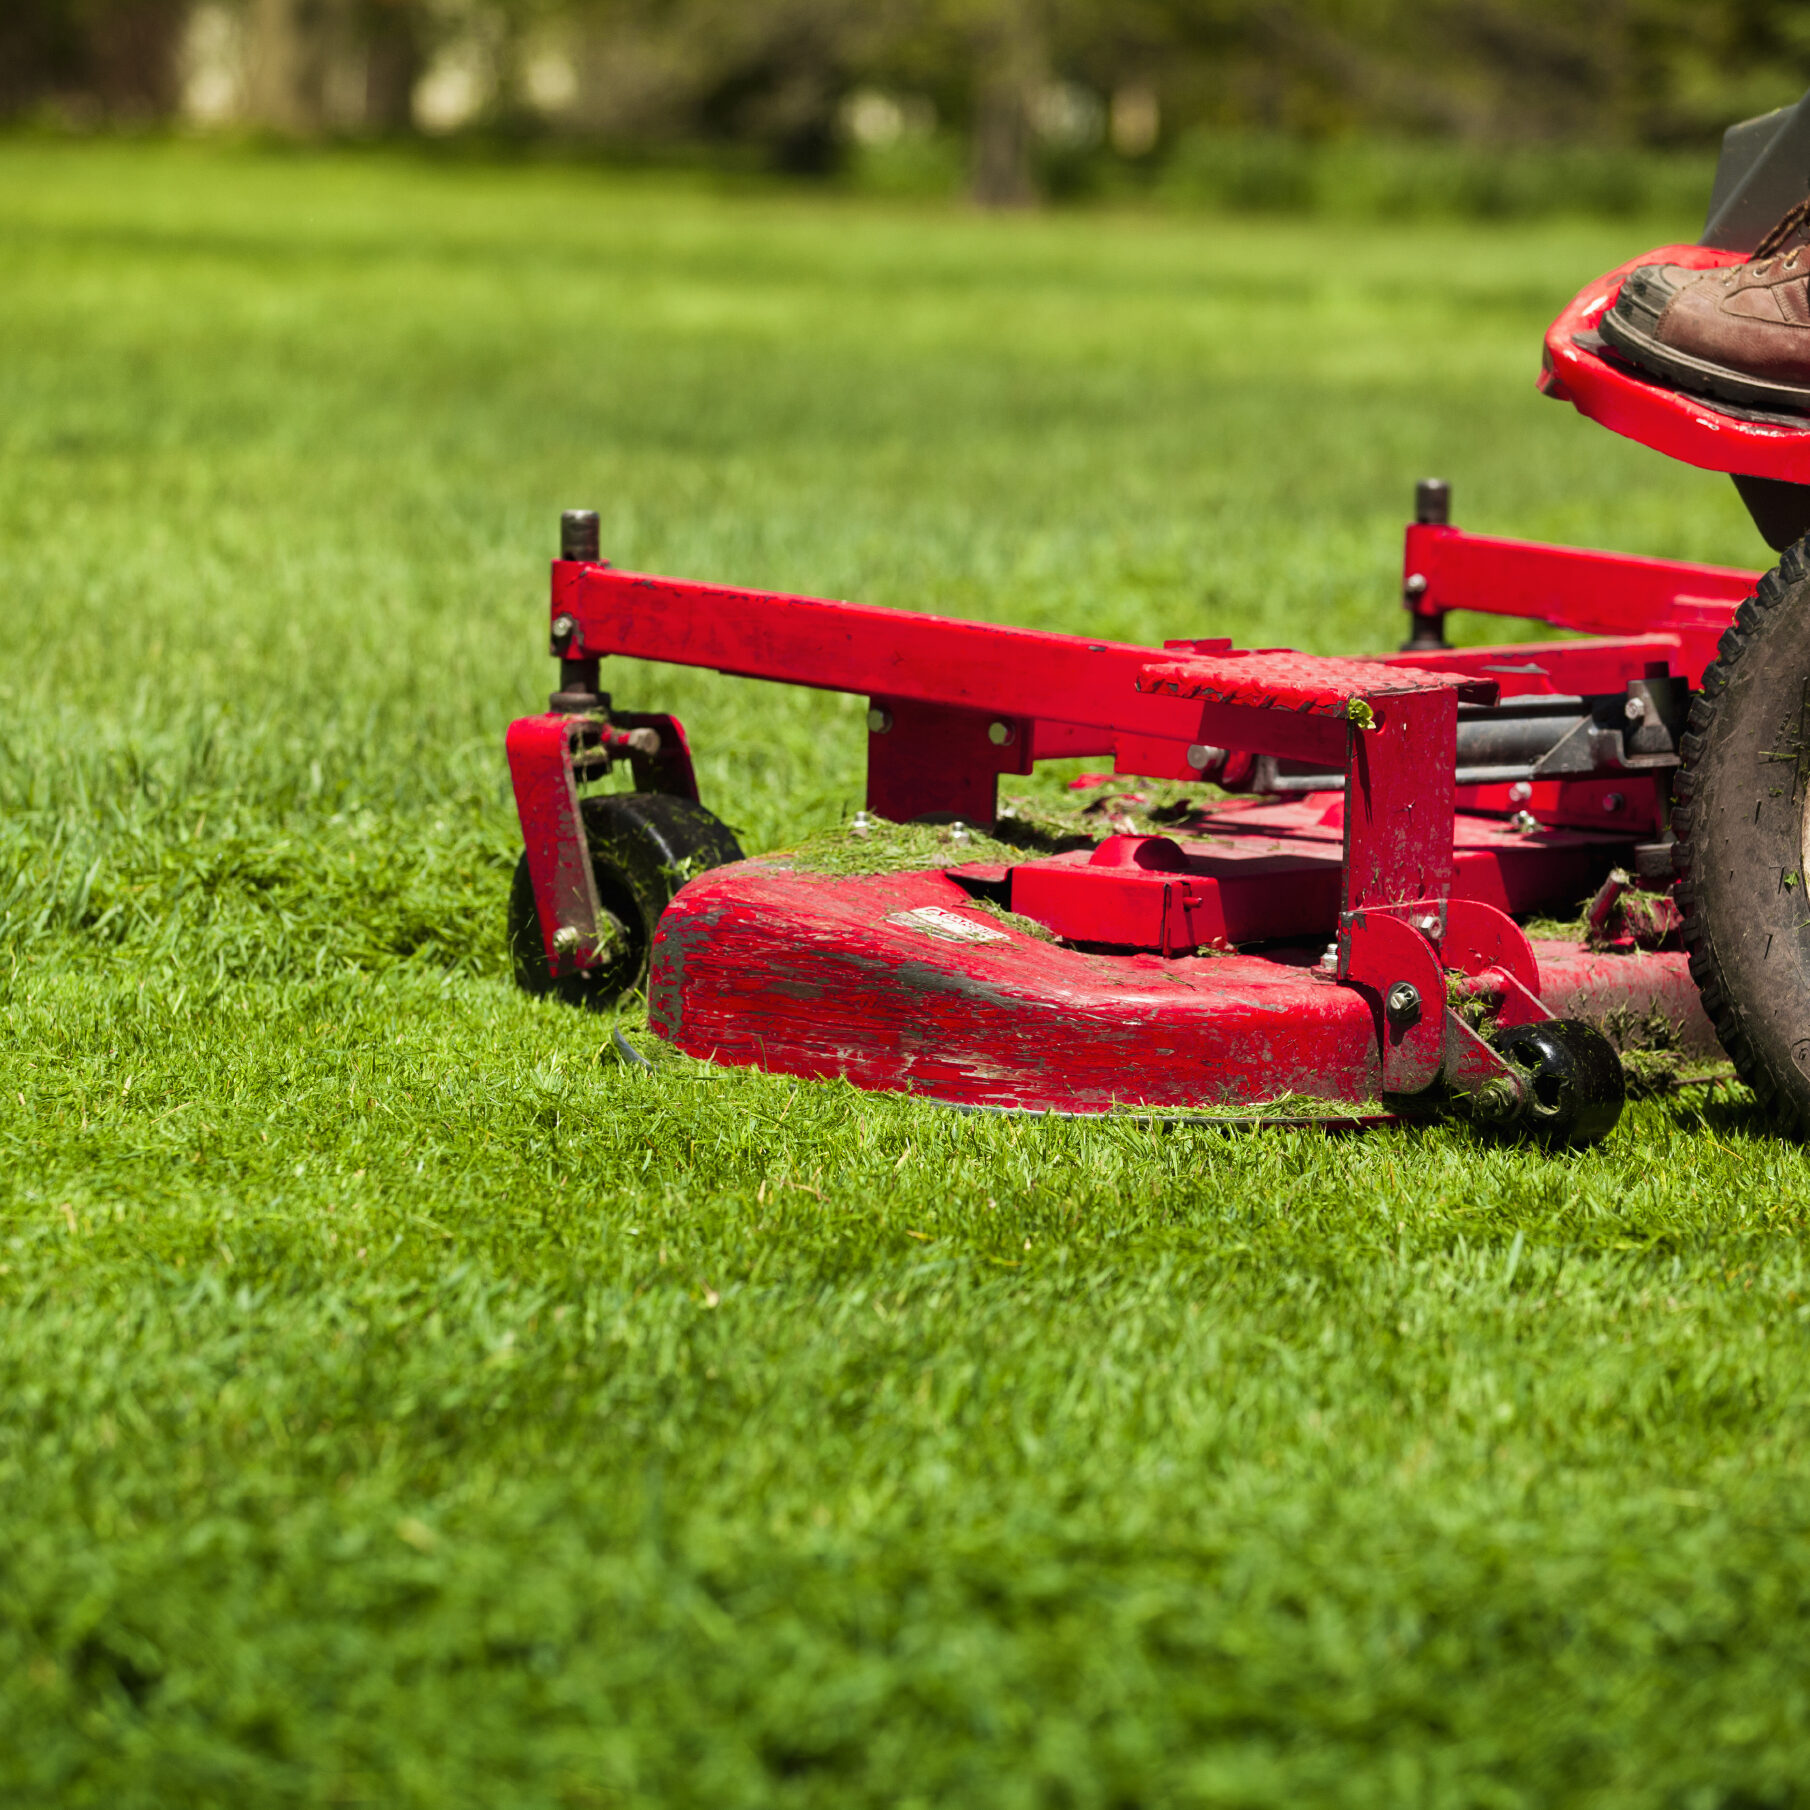 Gardener in the park on a lawn cutting tractor machine